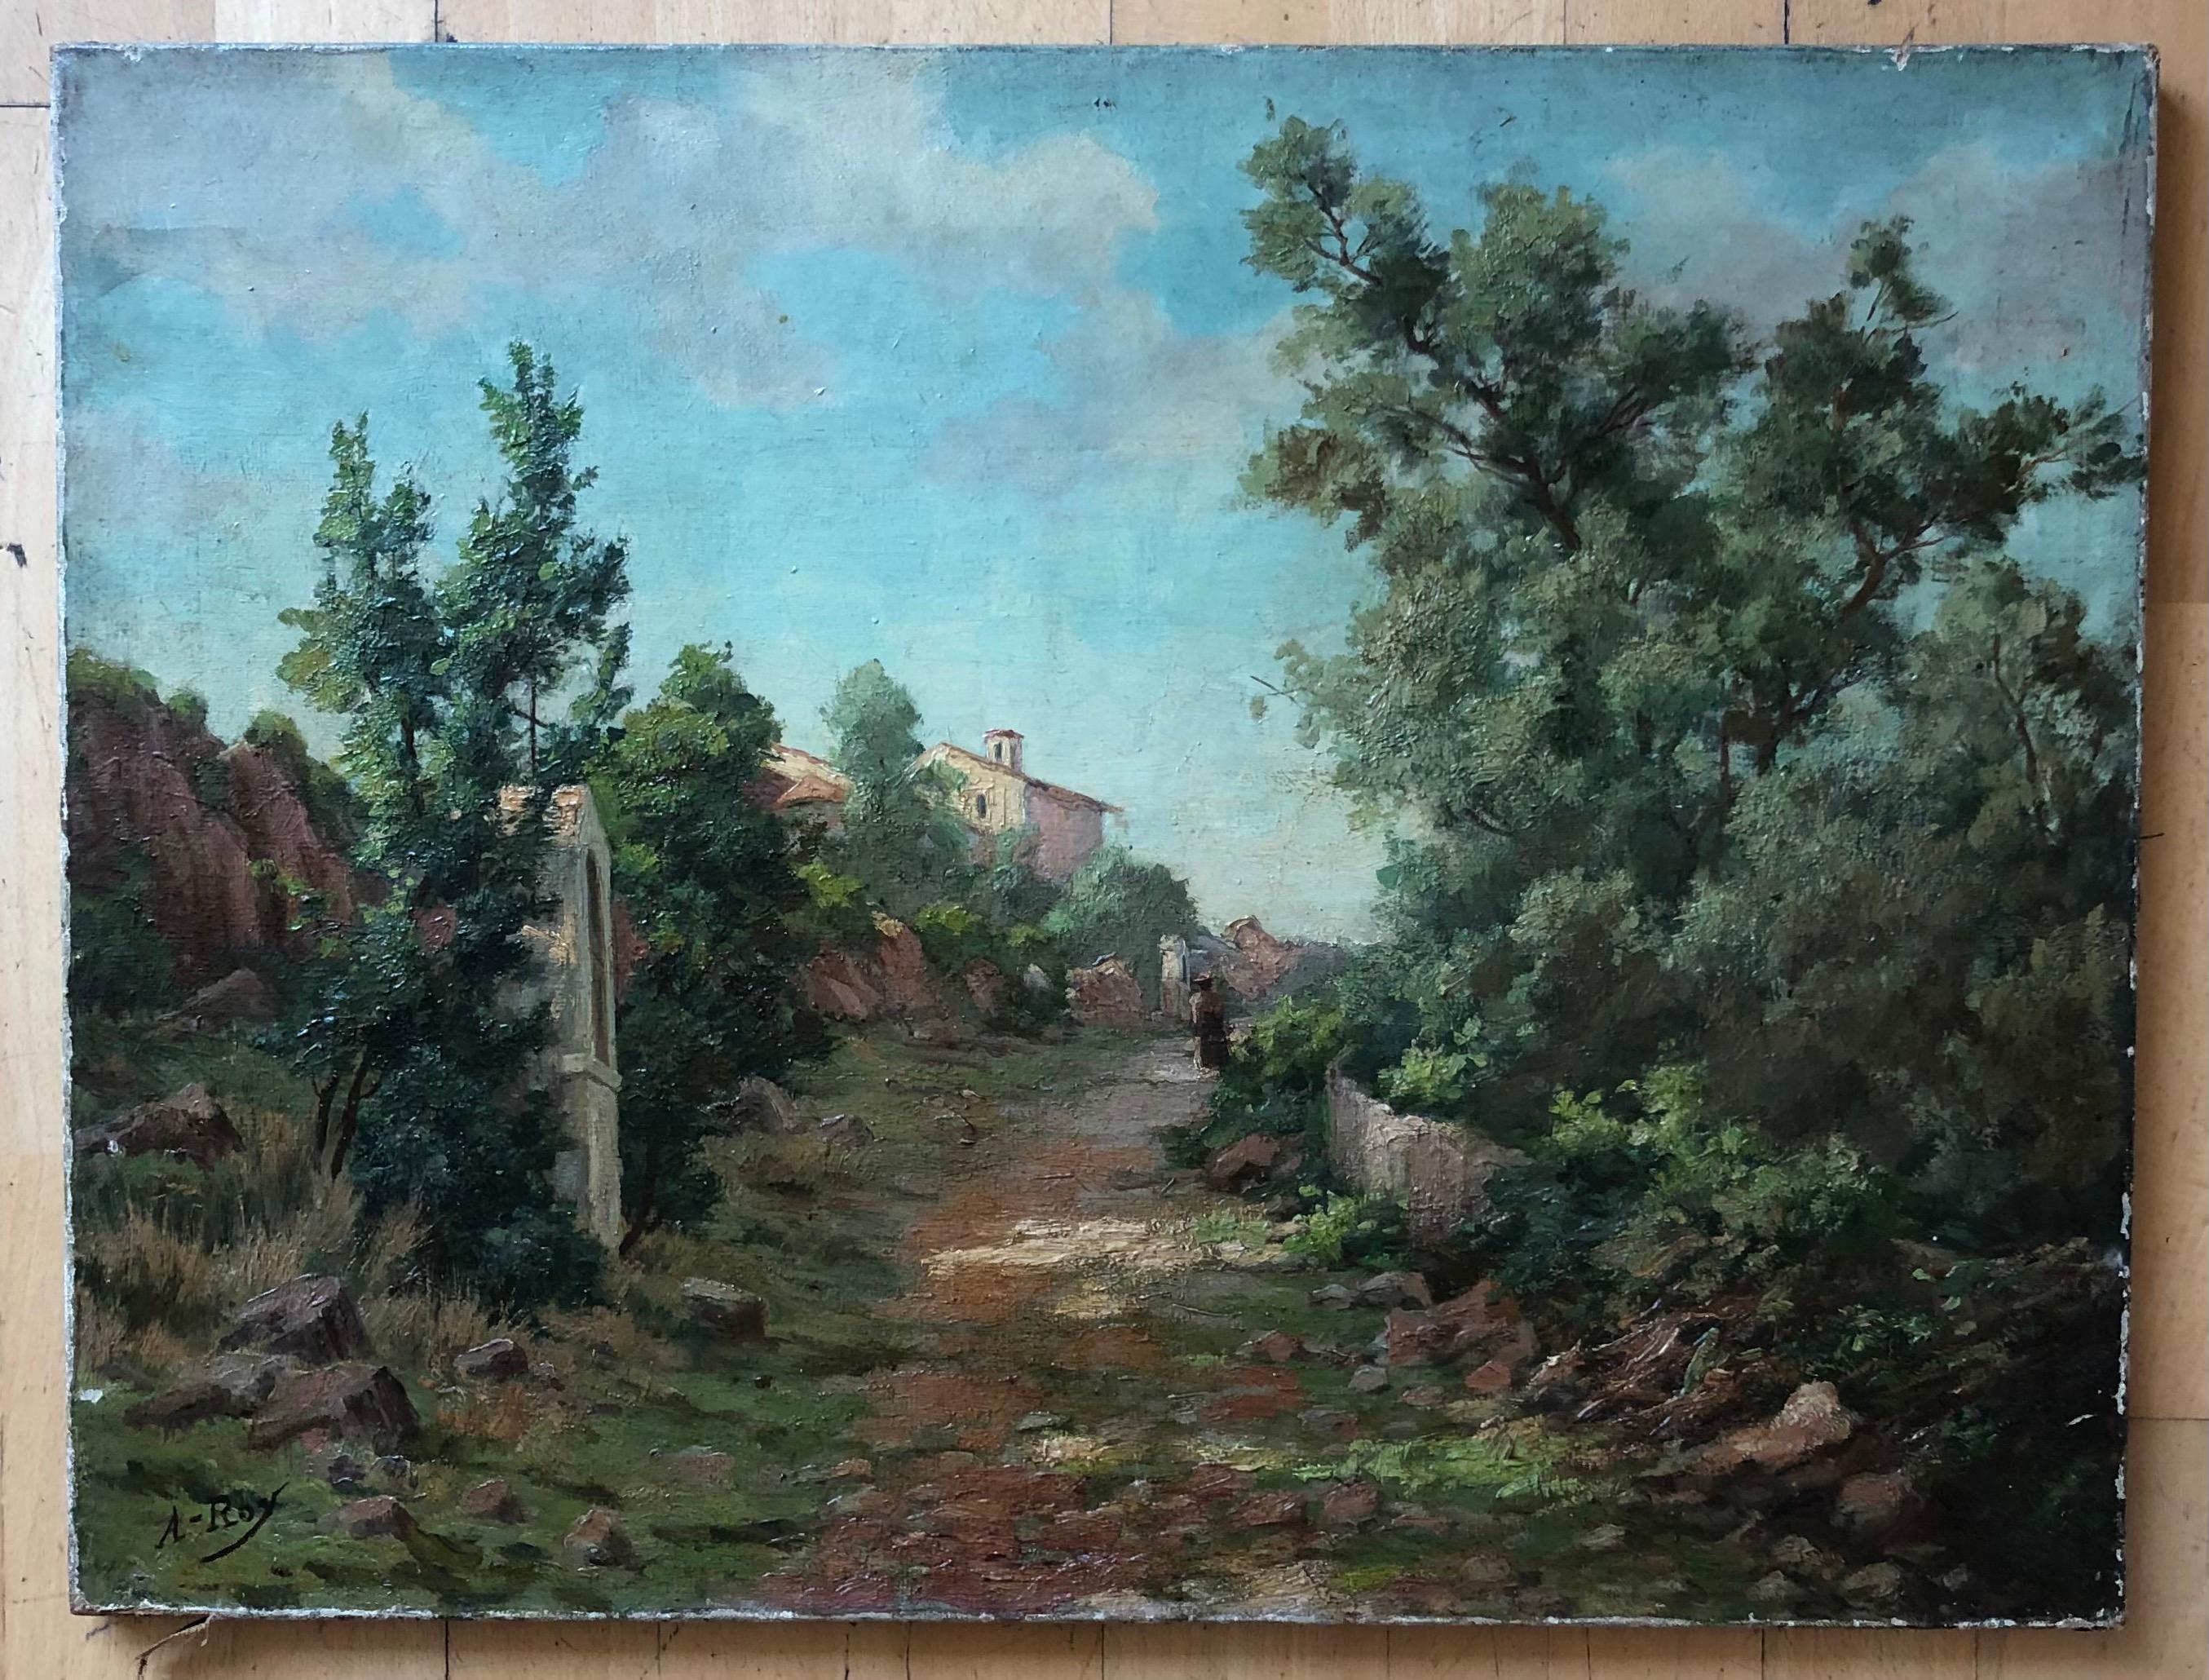 Street of a rural village in summer - Painting by A. Roy